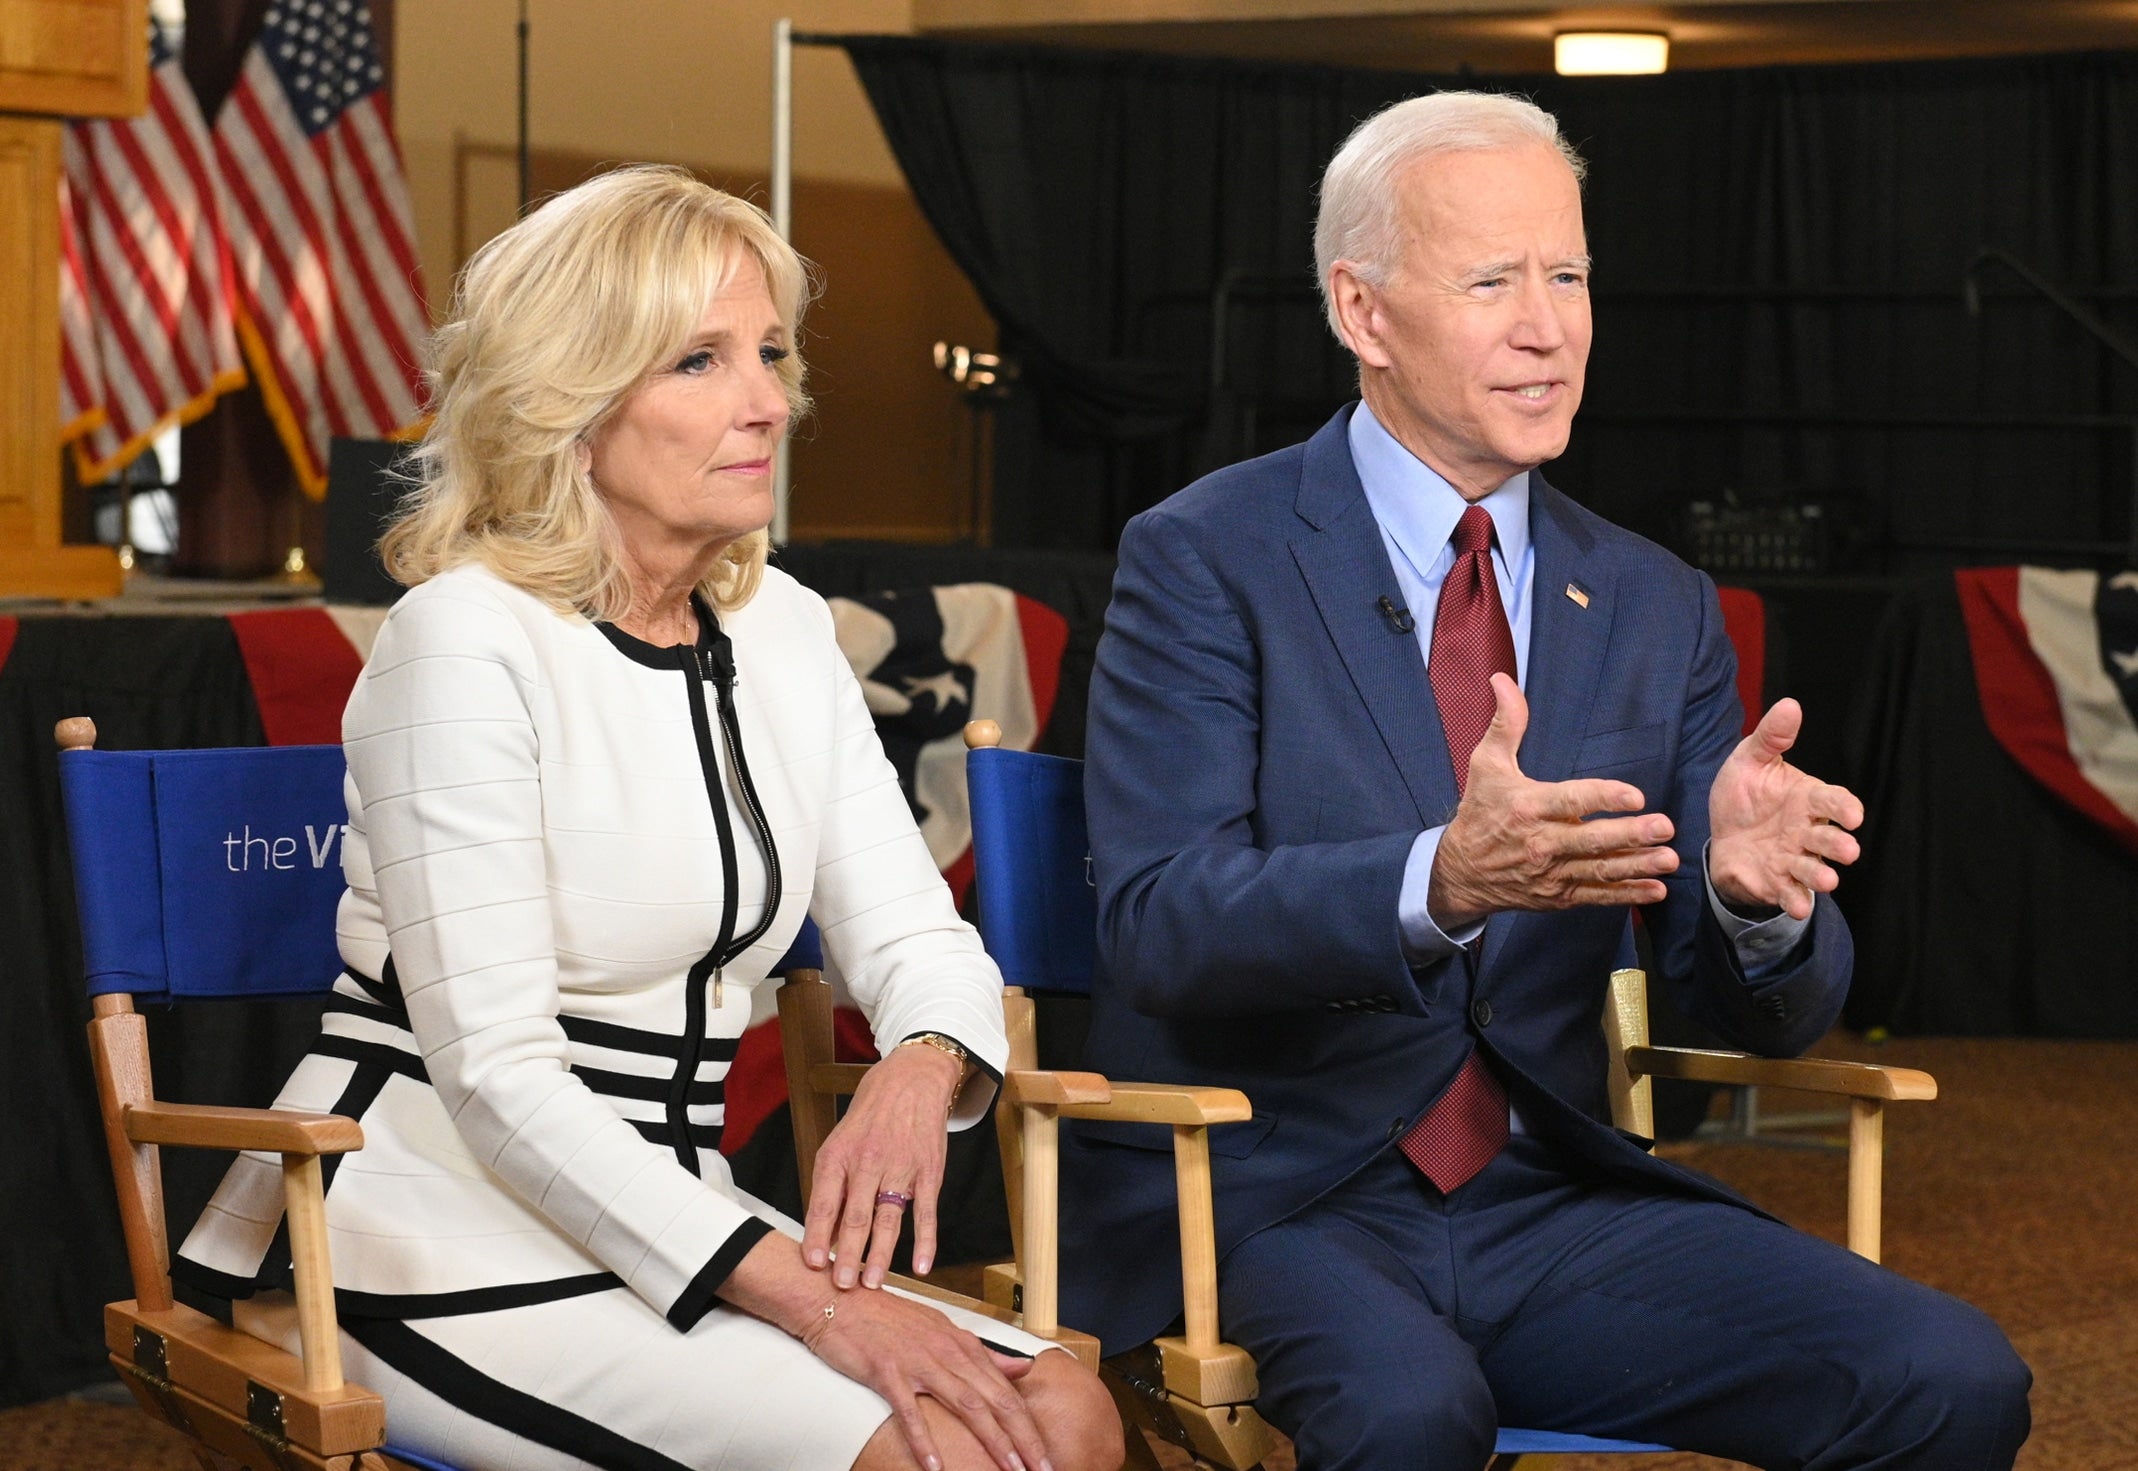 Jill Biden Doesn't Get To Tell People To 'Move On' From Anita Hill